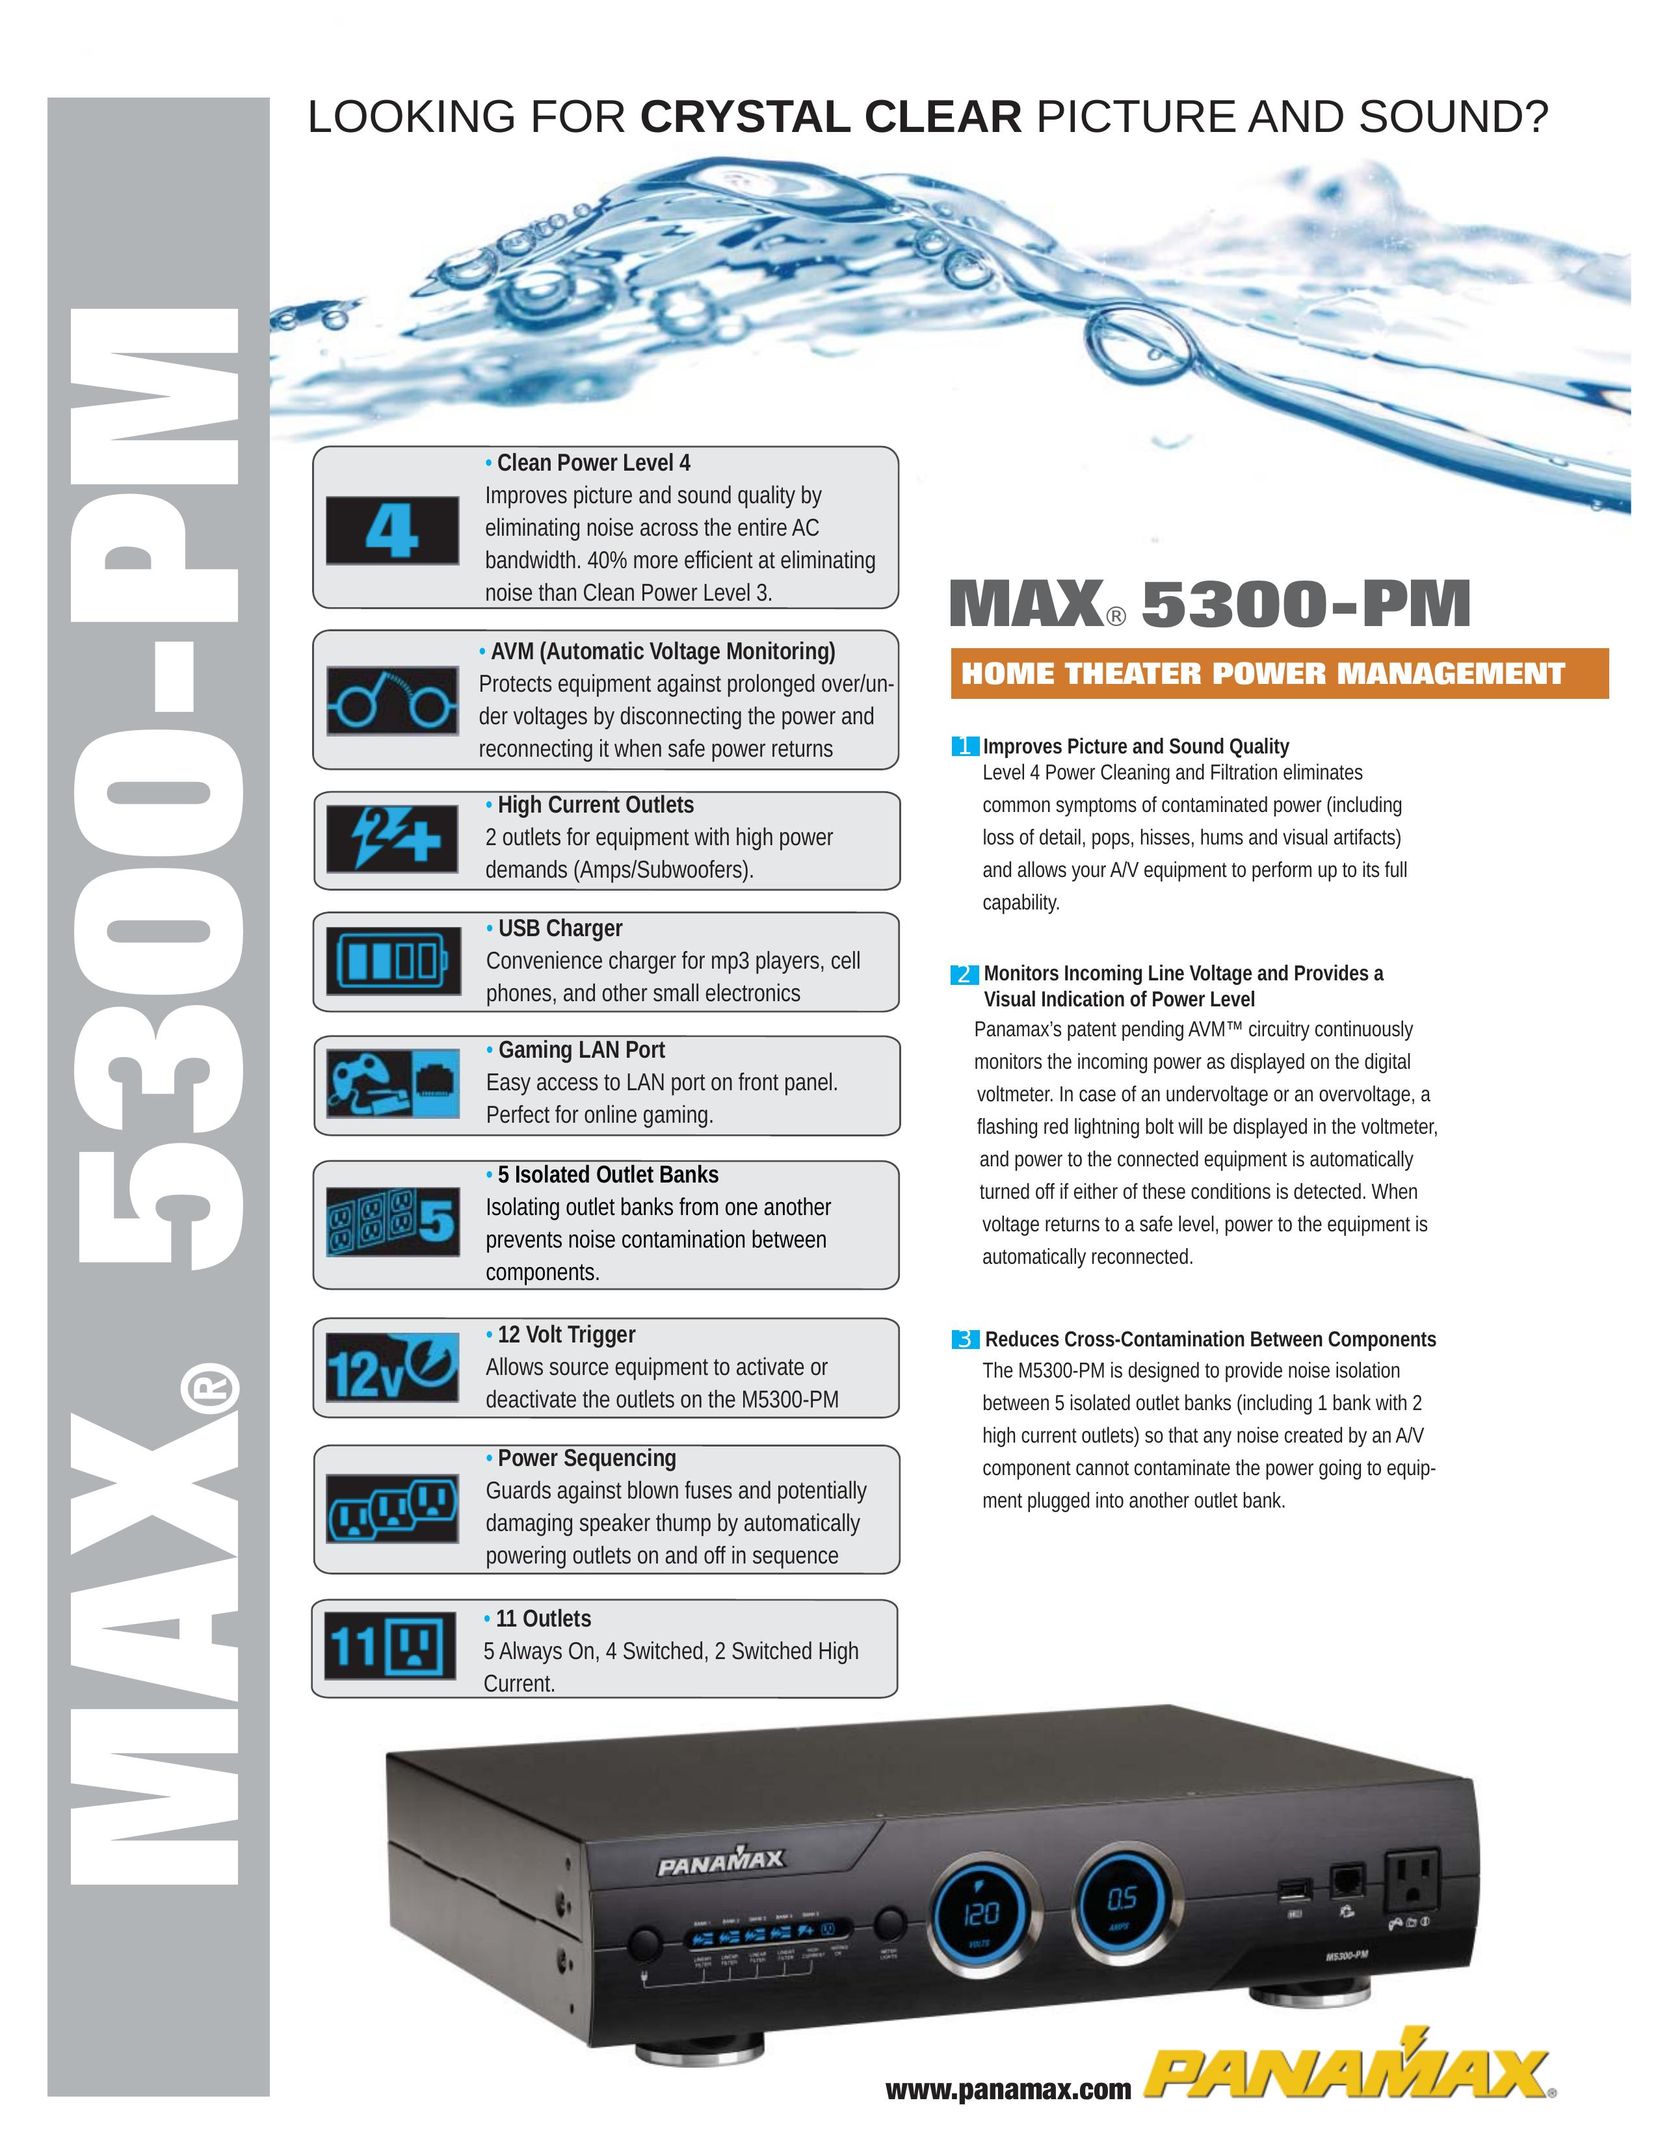 Panamax MAX 5300-PM Home Theater System User Manual